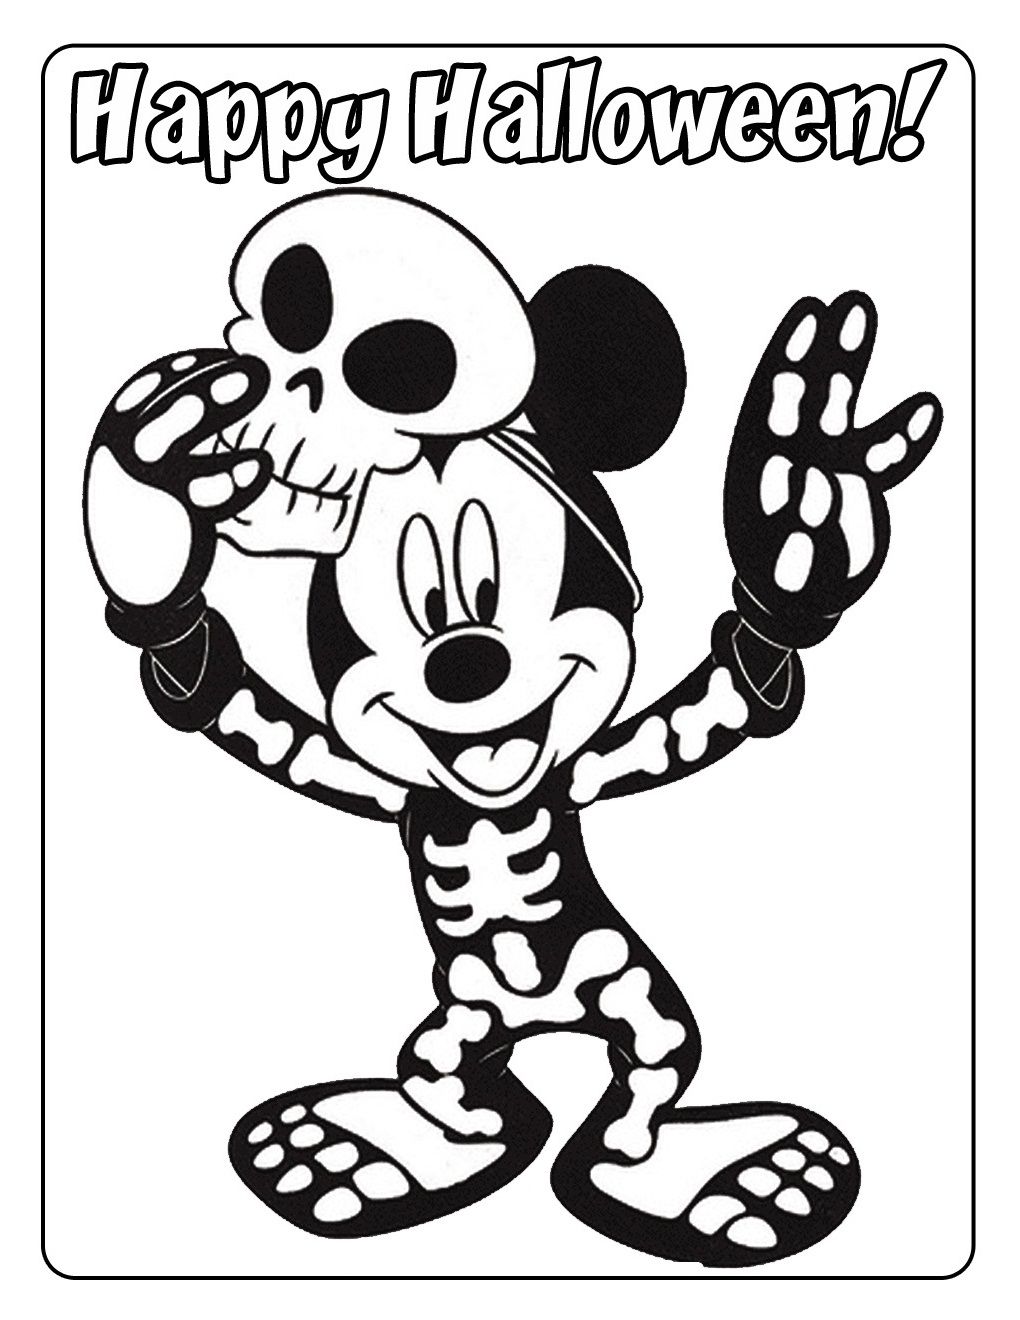 Printable Coloring Pages For Kids | Coloring Pages - Part 58